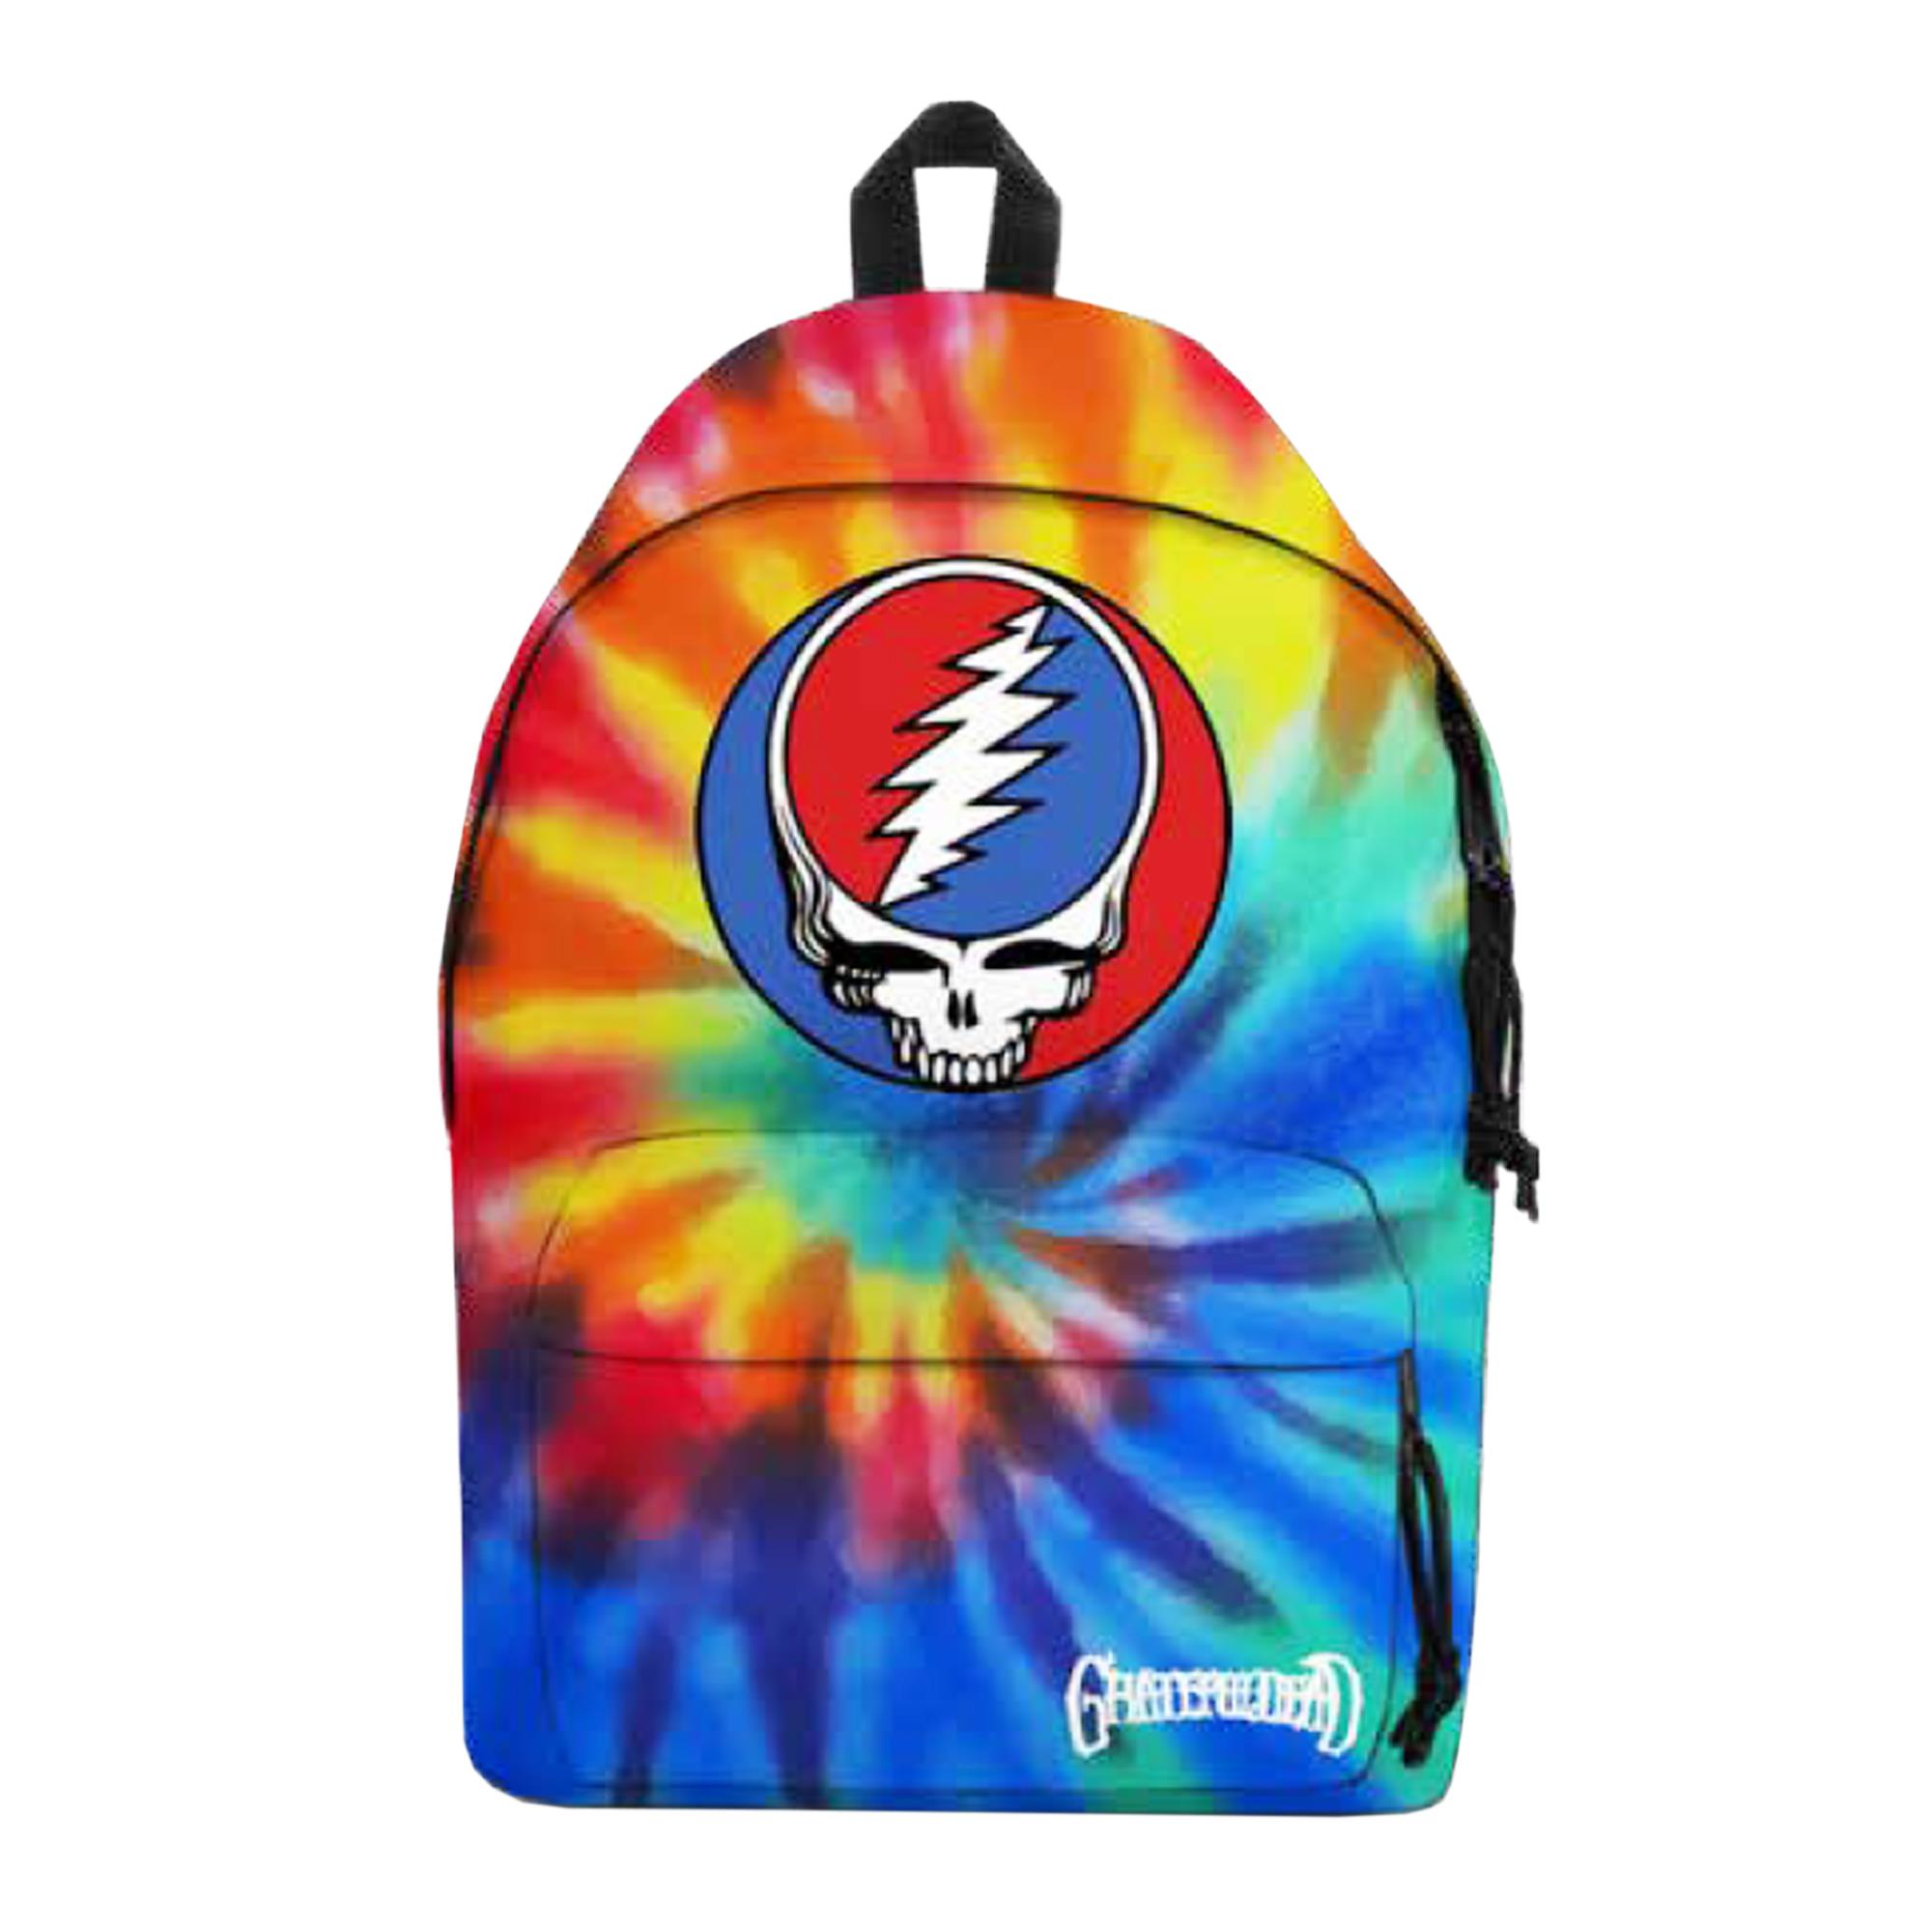 Steal Your Face Backpack